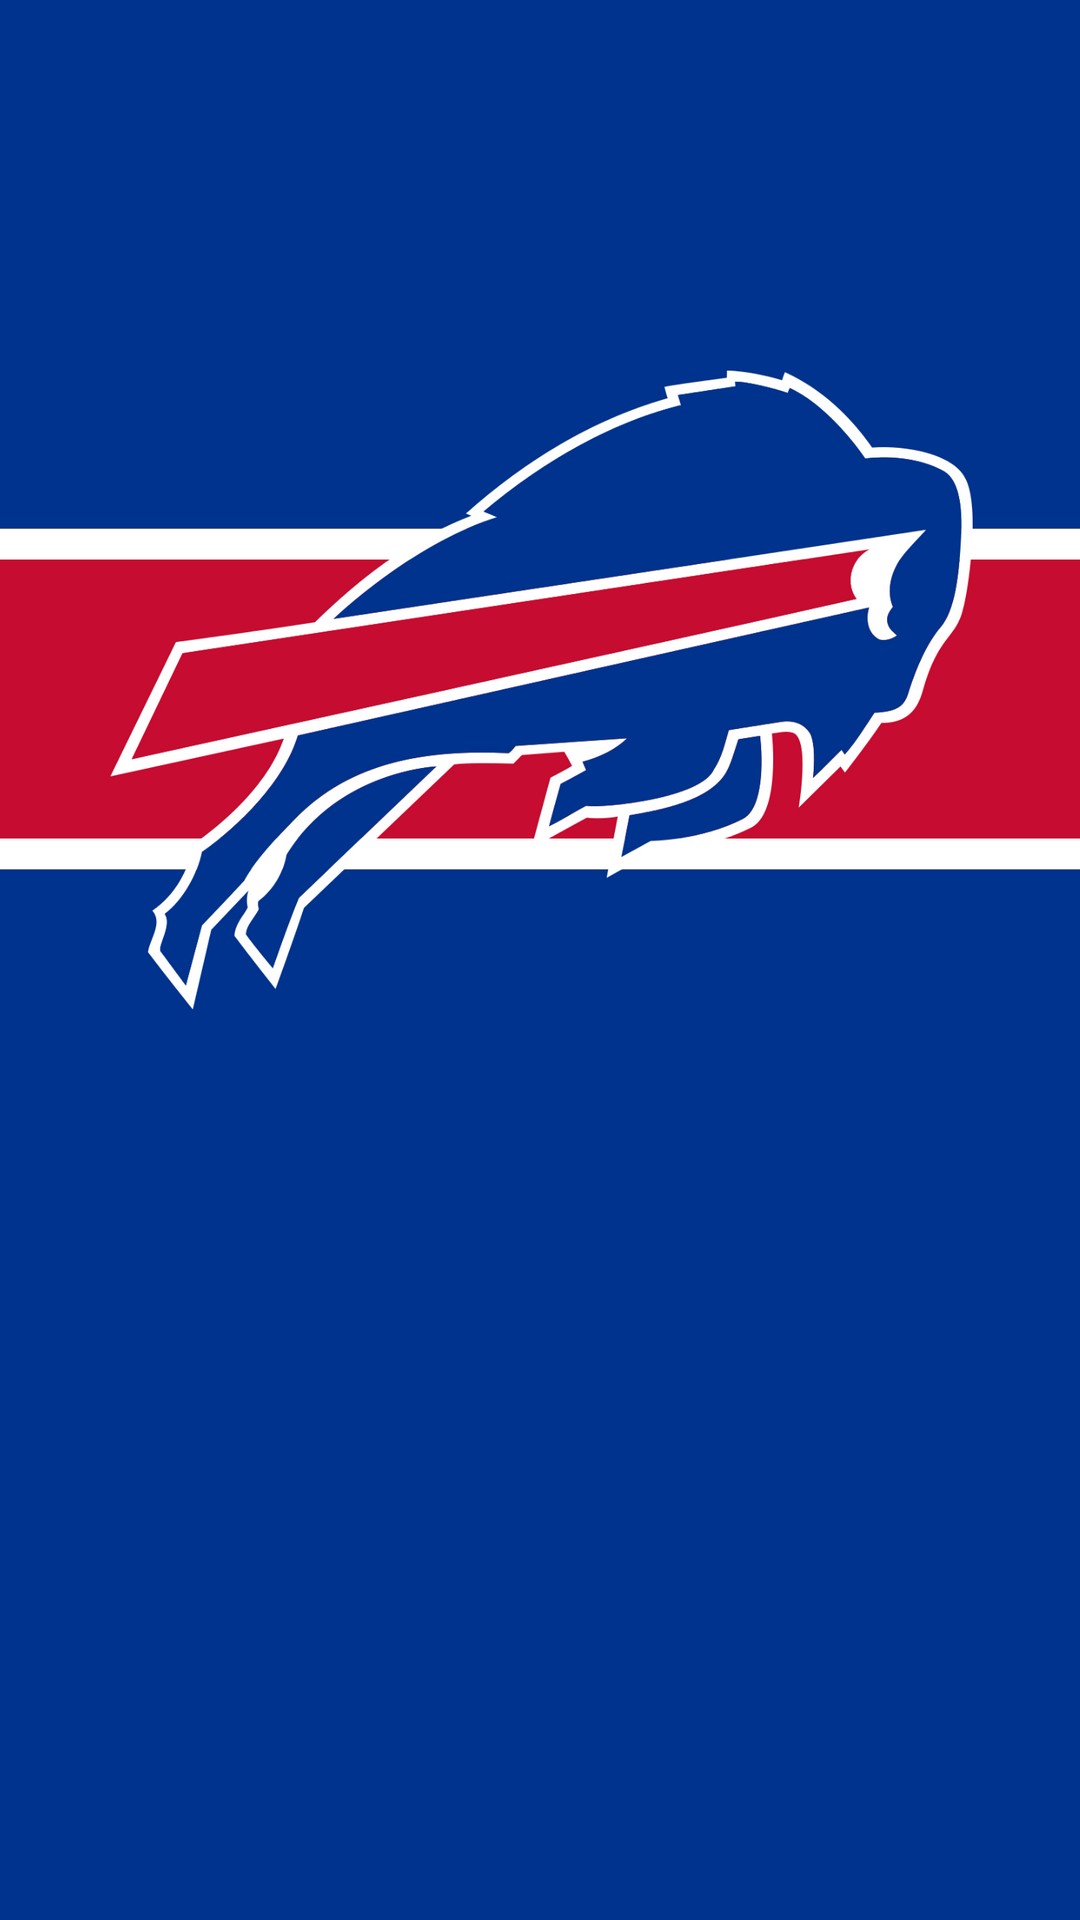 Buffalo Bills iPhone Wallpaper With high-resolution 1080X1920 pixel. Download and set as wallpaper for Apple iPhone X, XS Max, XR, 8, 7, 6, SE, iPad, Android